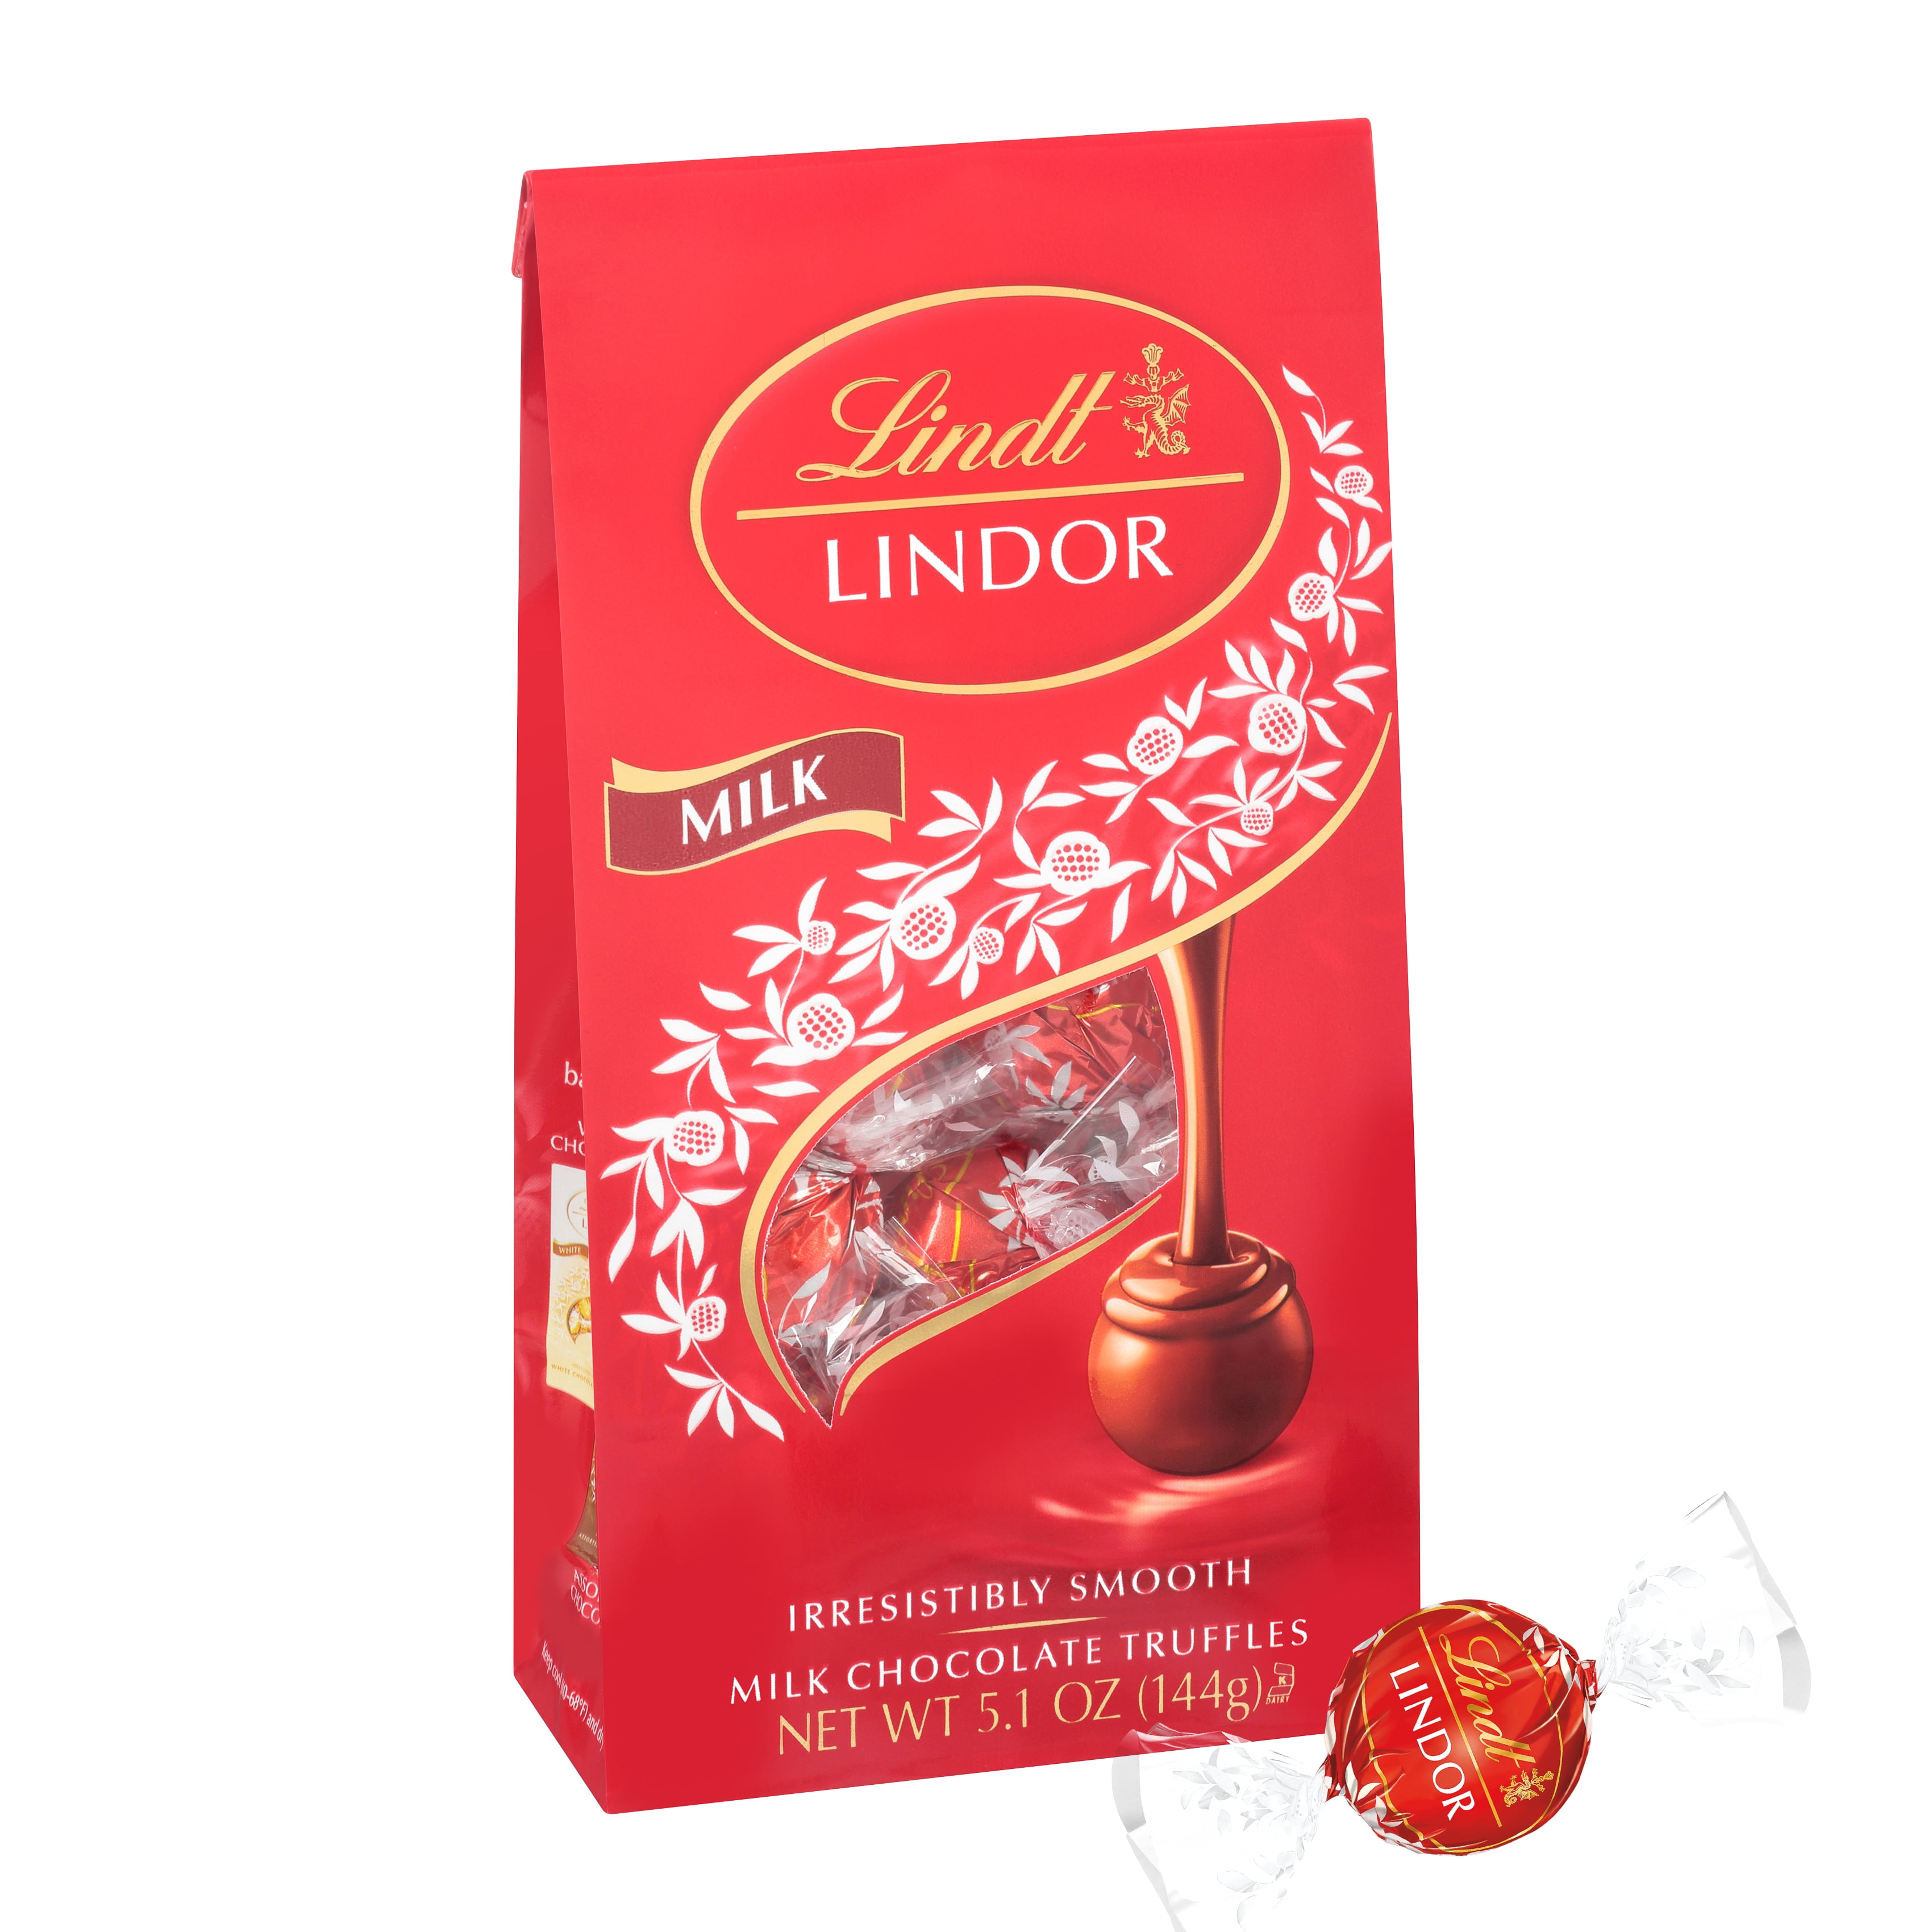 Lindt LINDOR, Milk Chocolate Candy Truffles, Easter Chocolate, 5.1 oz. Bag, 1 Count